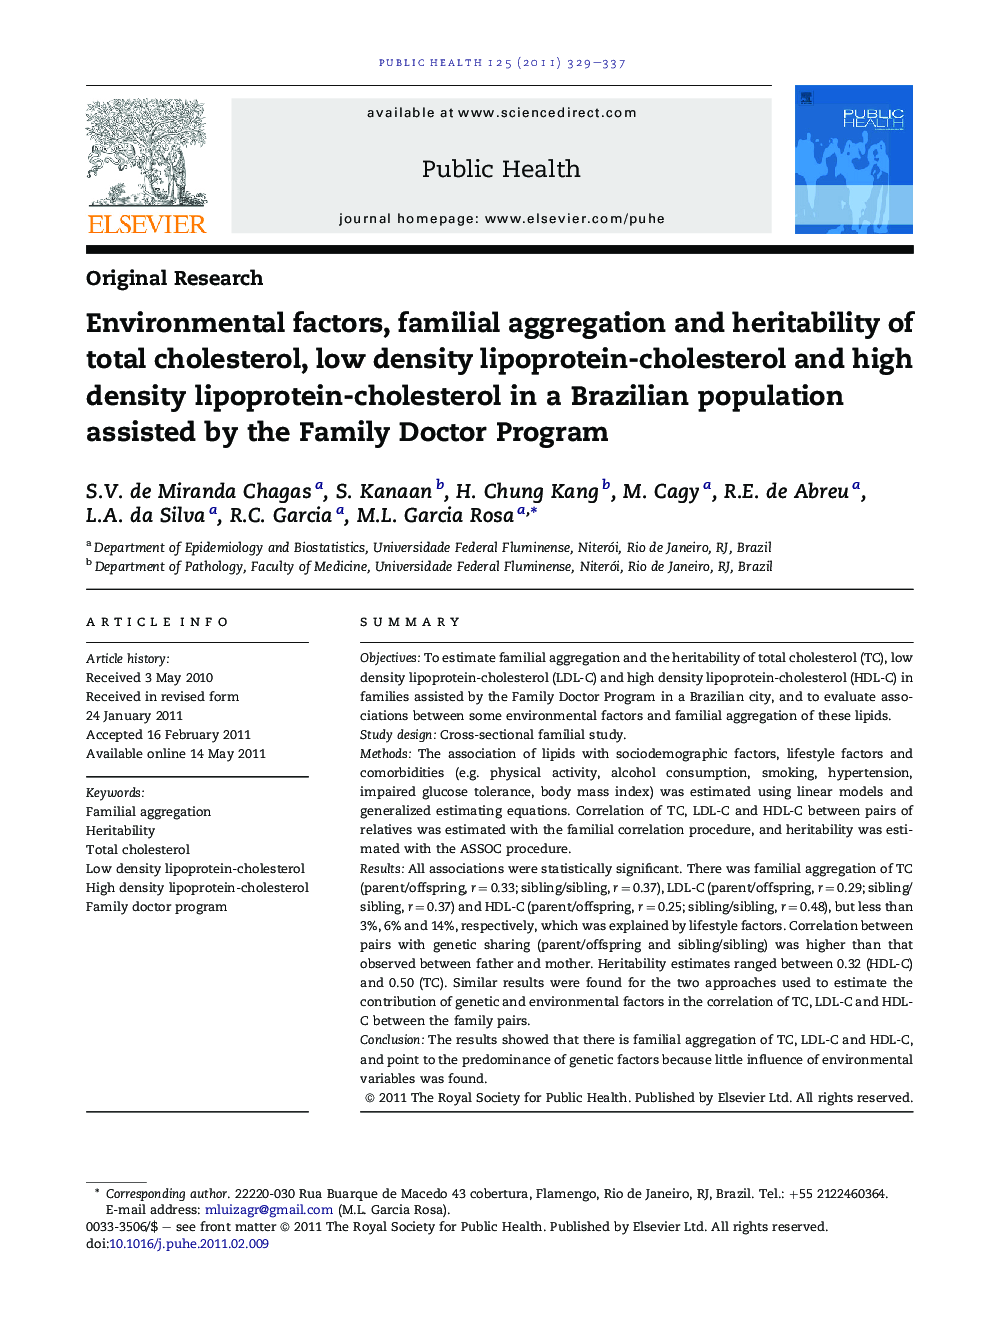 Environmental factors, familial aggregation and heritability of total cholesterol, low density lipoprotein-cholesterol and high density lipoprotein-cholesterol in a Brazilian population assisted by the Family Doctor Program